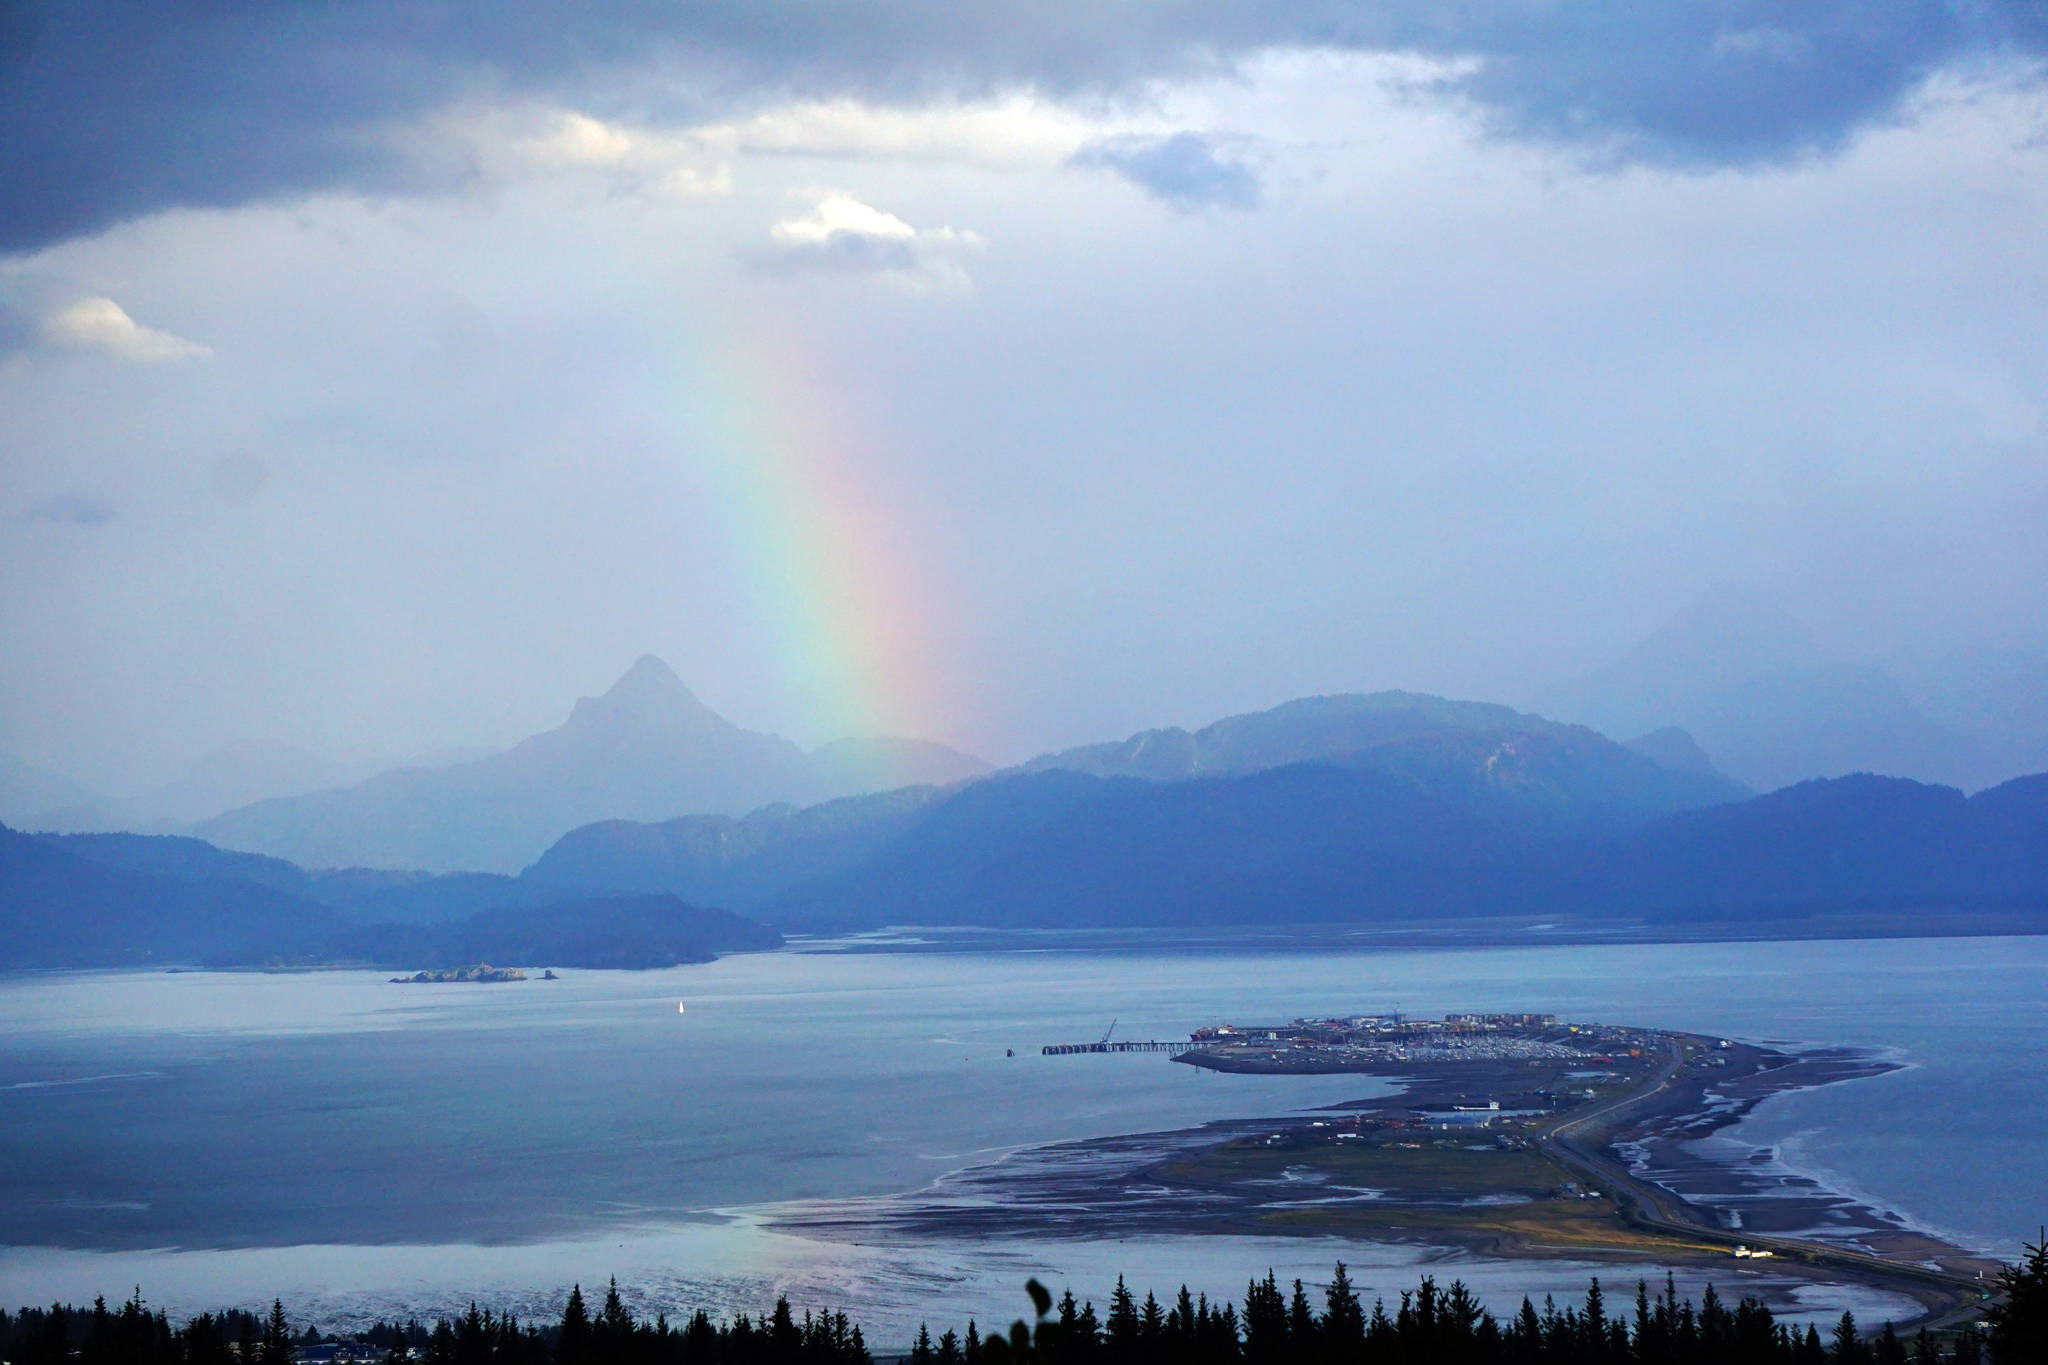 A rainbow appears over Kachemak Bay and Poot Peak on Monday, Sept. 4, 2017 in Homer, Alaska. (Photo by Michael Armstrong/Homer News)